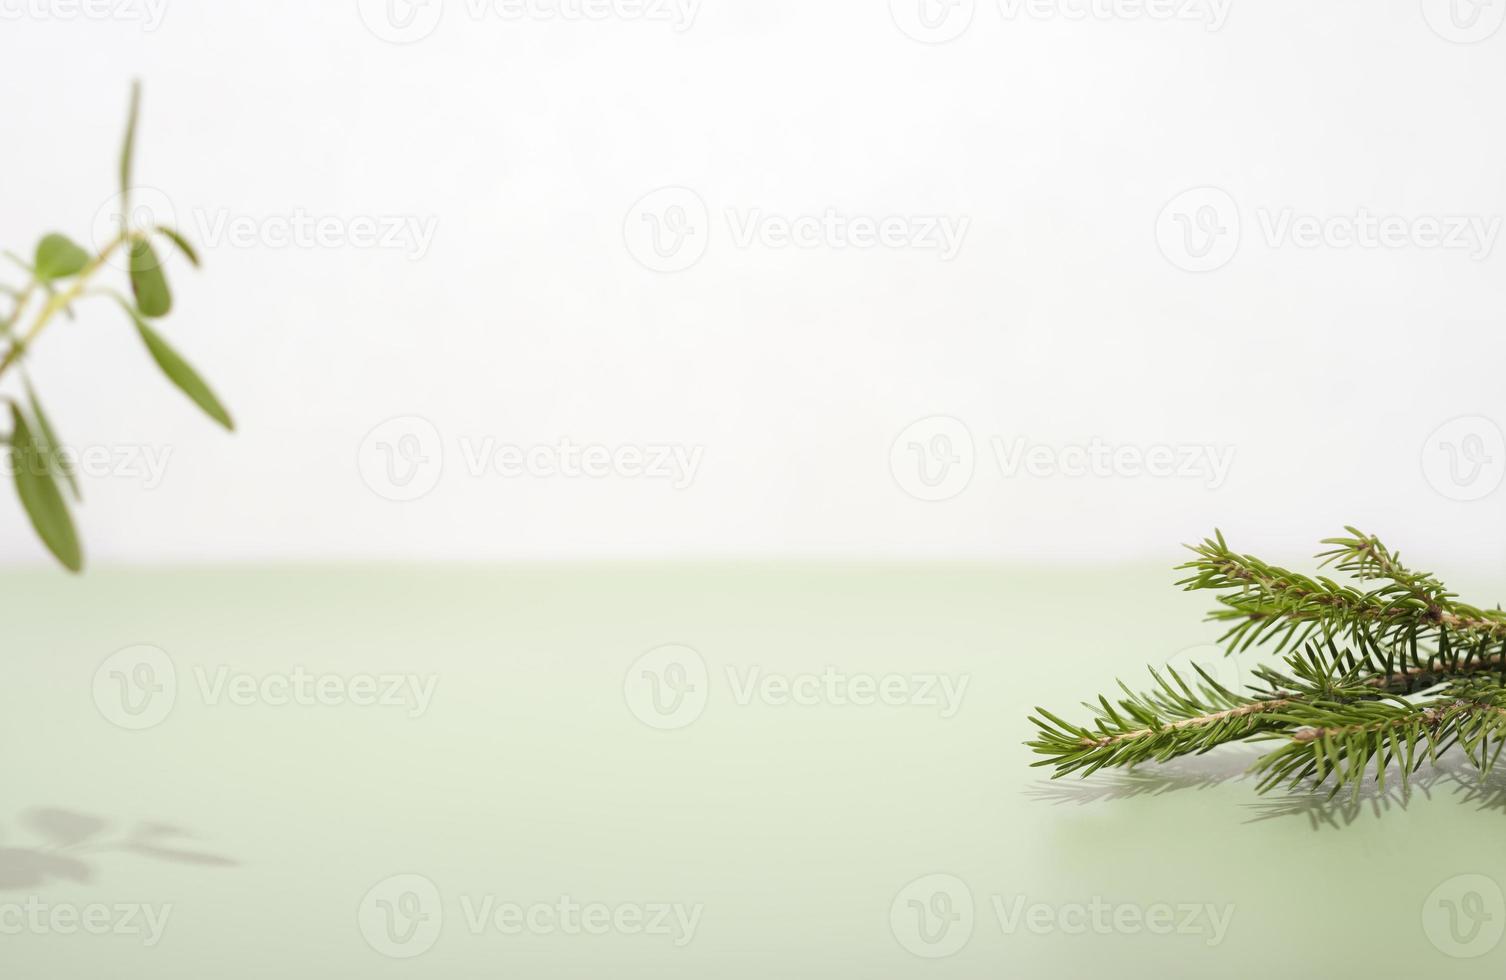 natural green table top scene for product presentation. mockup for package placement, sale promotion display with fir tree branch and green leaves. photo